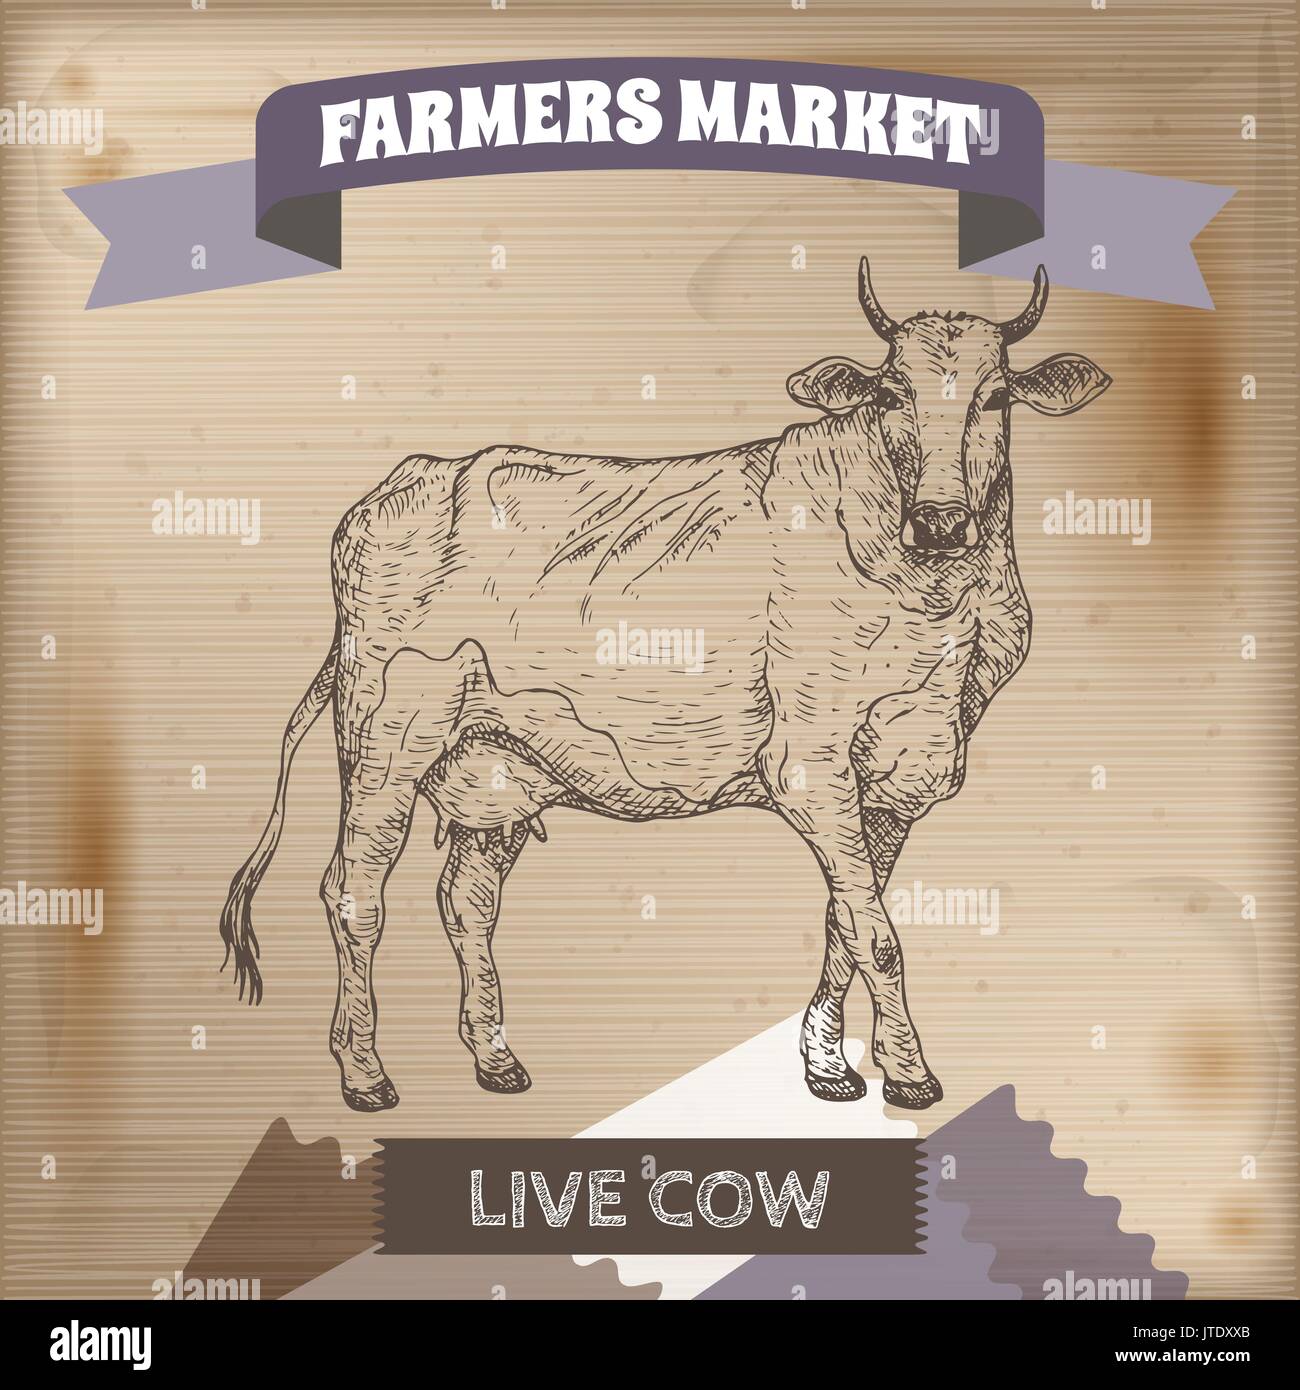 Vintage farmers market label with live cow. Stock Vector